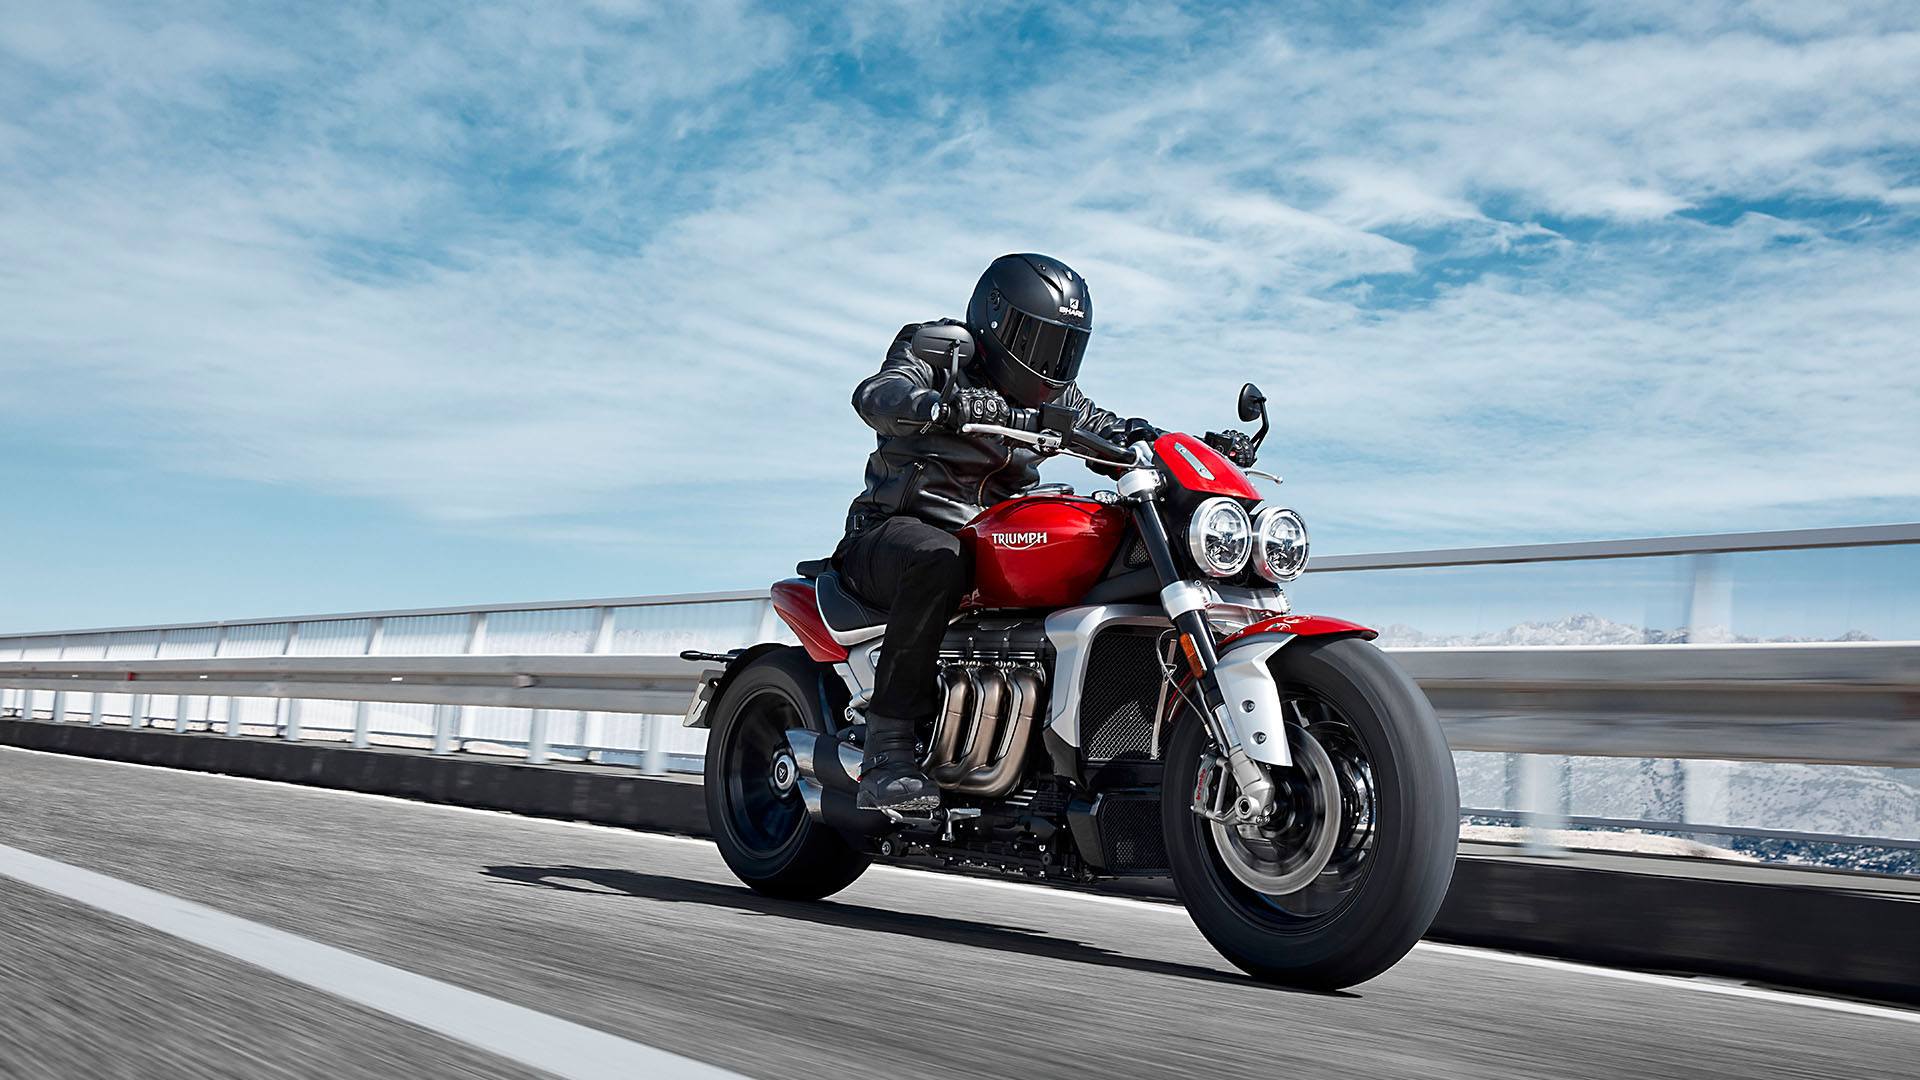 2022 Triumph Rocket 3 R in Mahwah, New Jersey - Photo 2